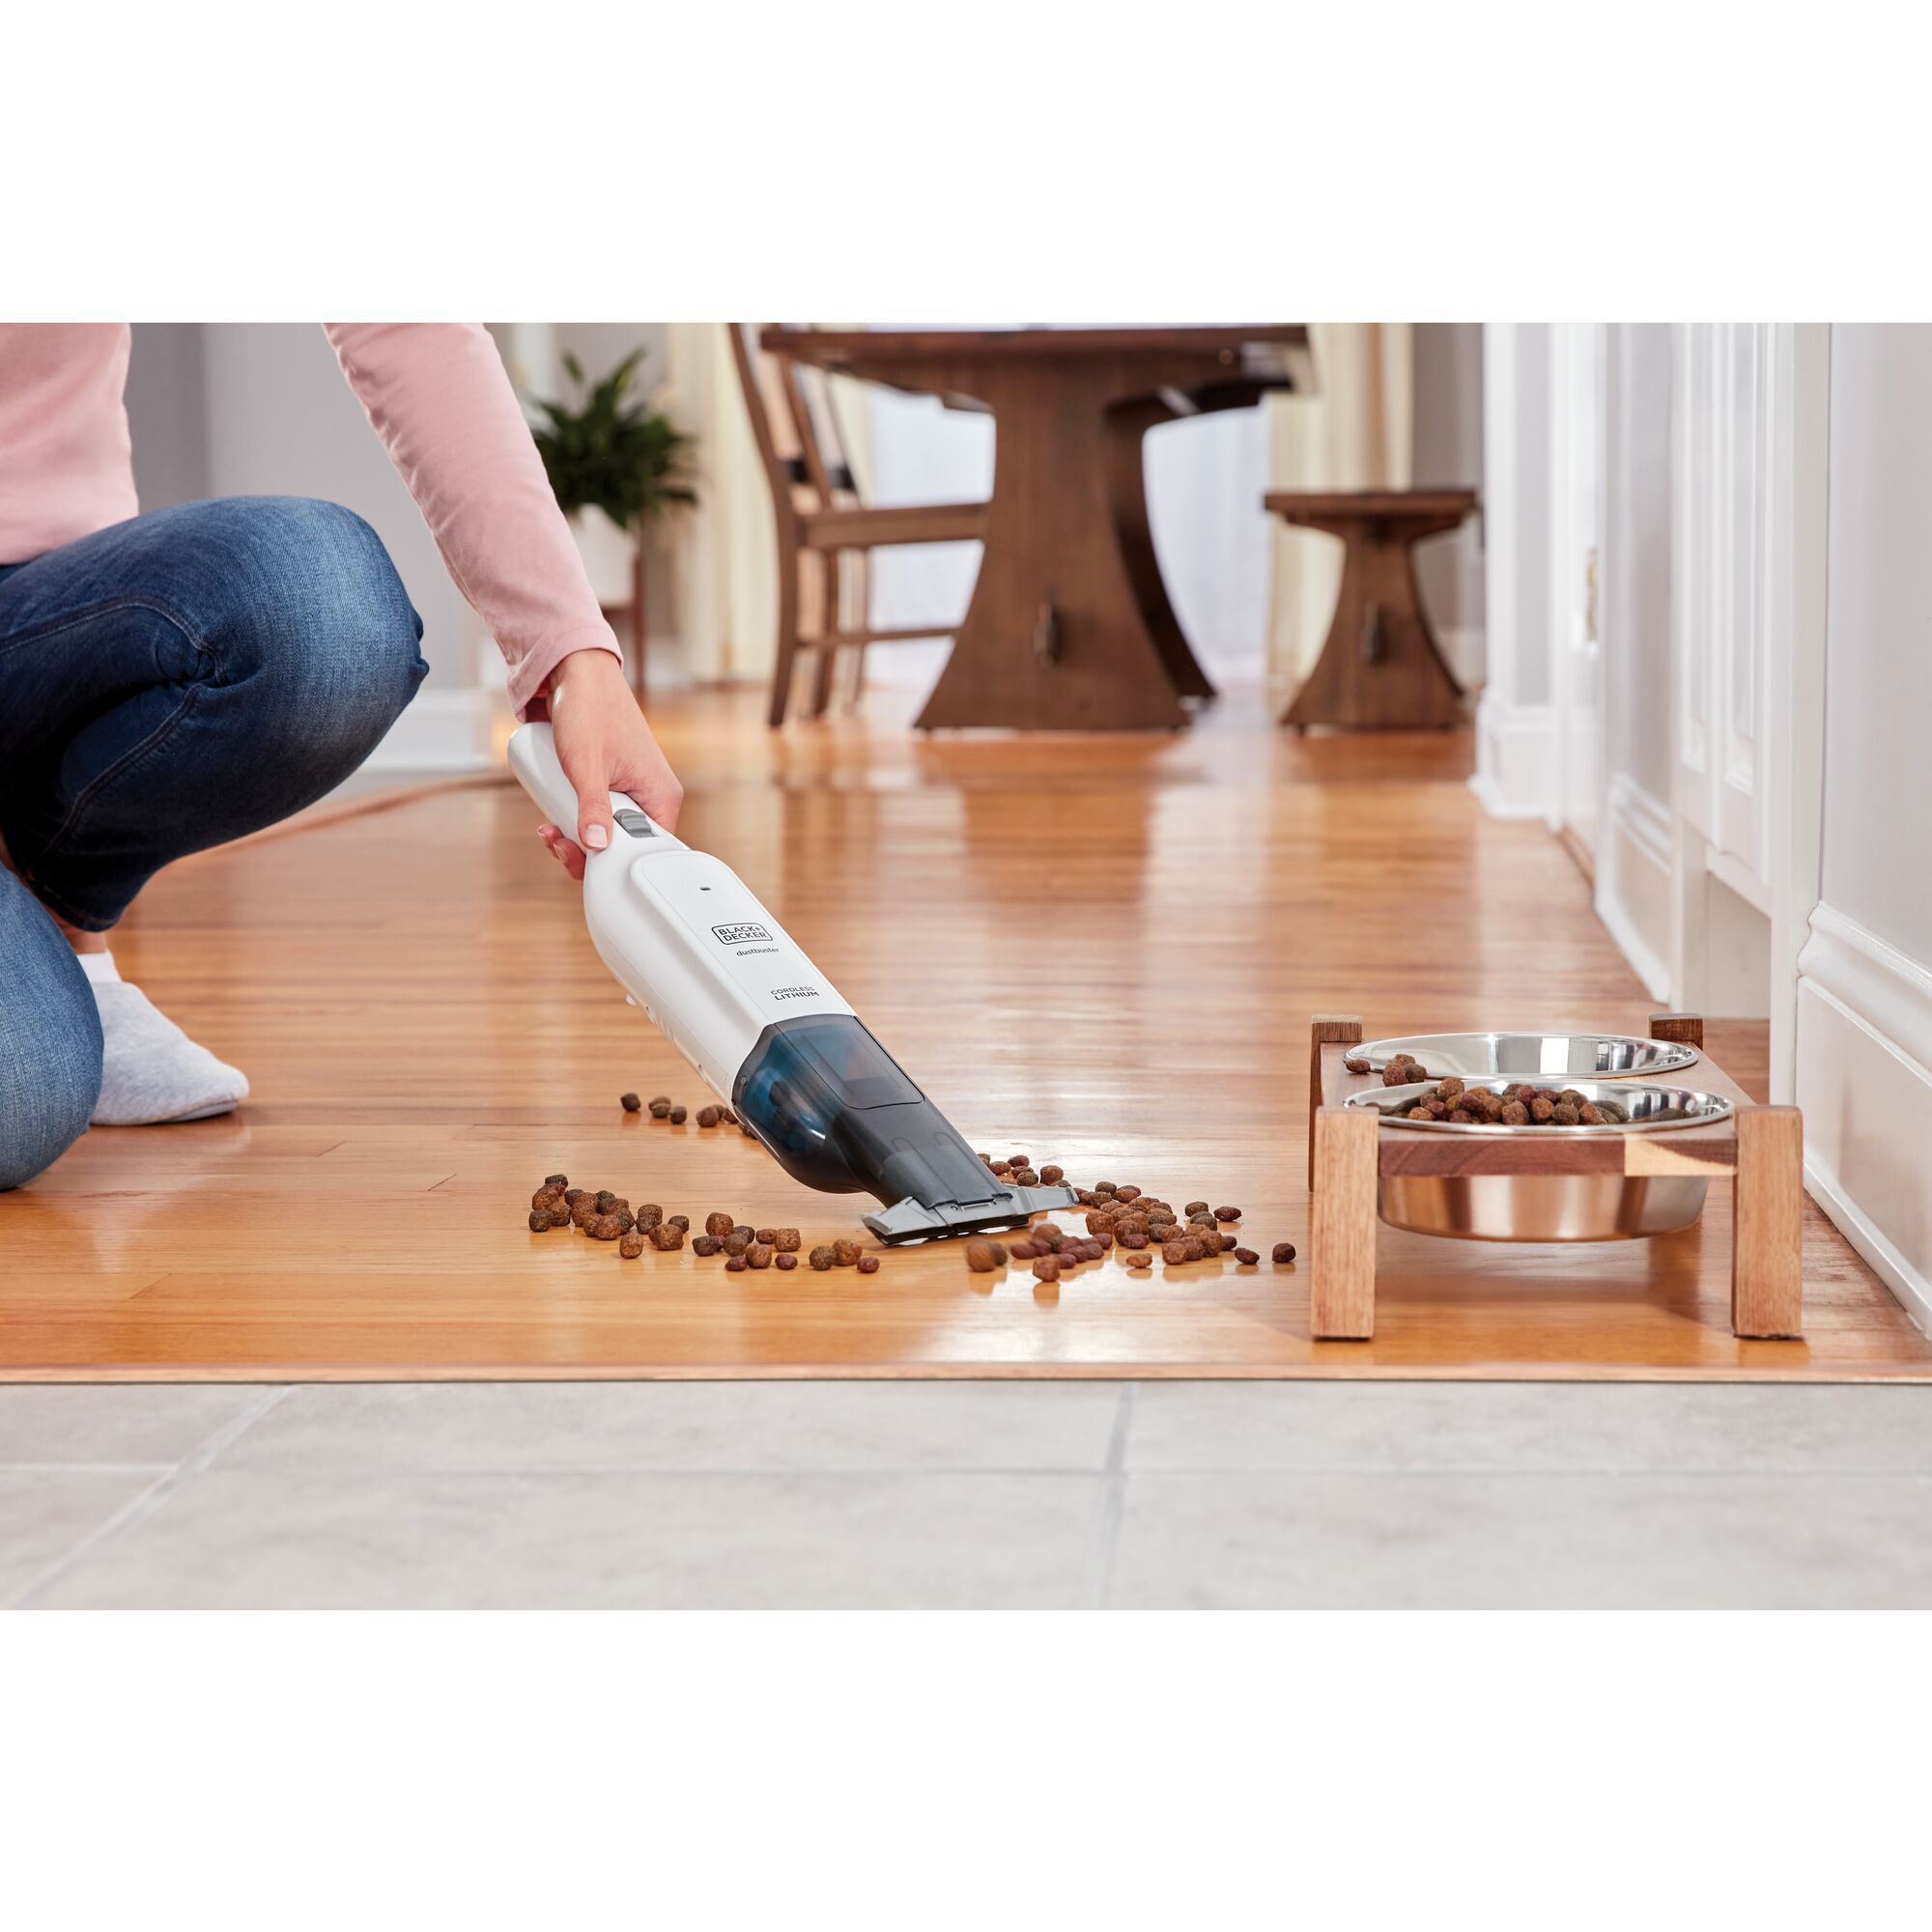 Dustbuster 12 volt advance clean cordless hand vacuum being used on a floor.